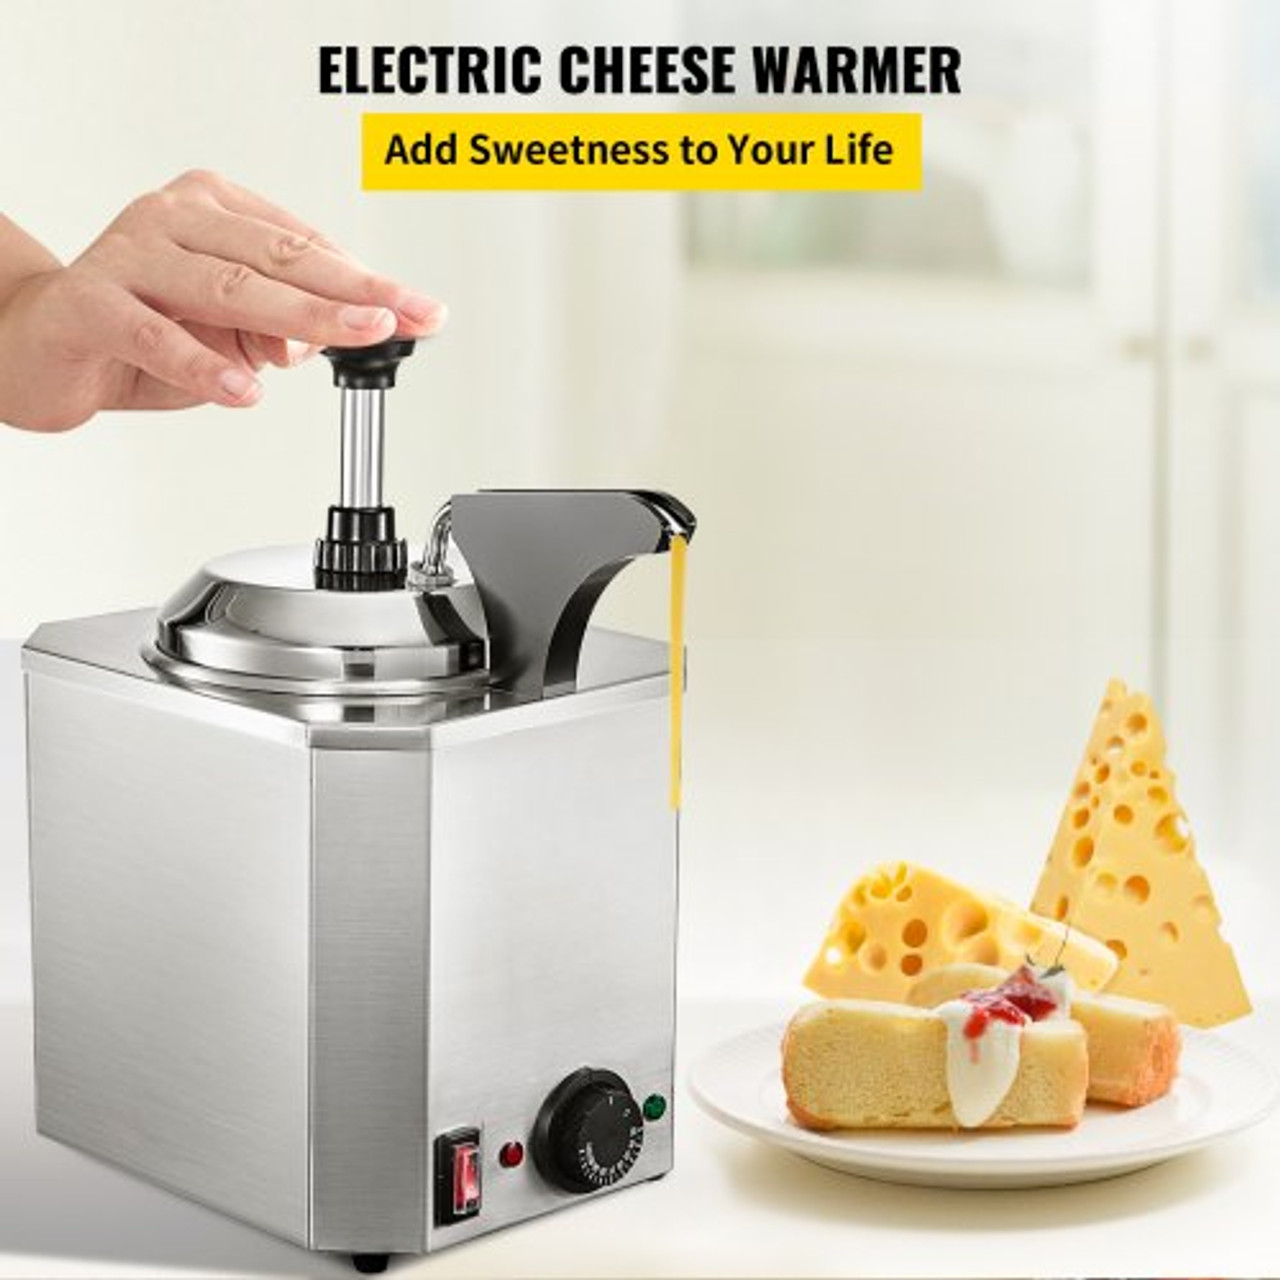 Cheese Dispenser with Pump, 2.6 Qt Capacity Cheese Warmer, Stainless Steel Hot Fudge Warmer with Pump 650W Cheese Dispenser, 30-110? Temp Adjustable, for Hot Fudge Cheese Caramel